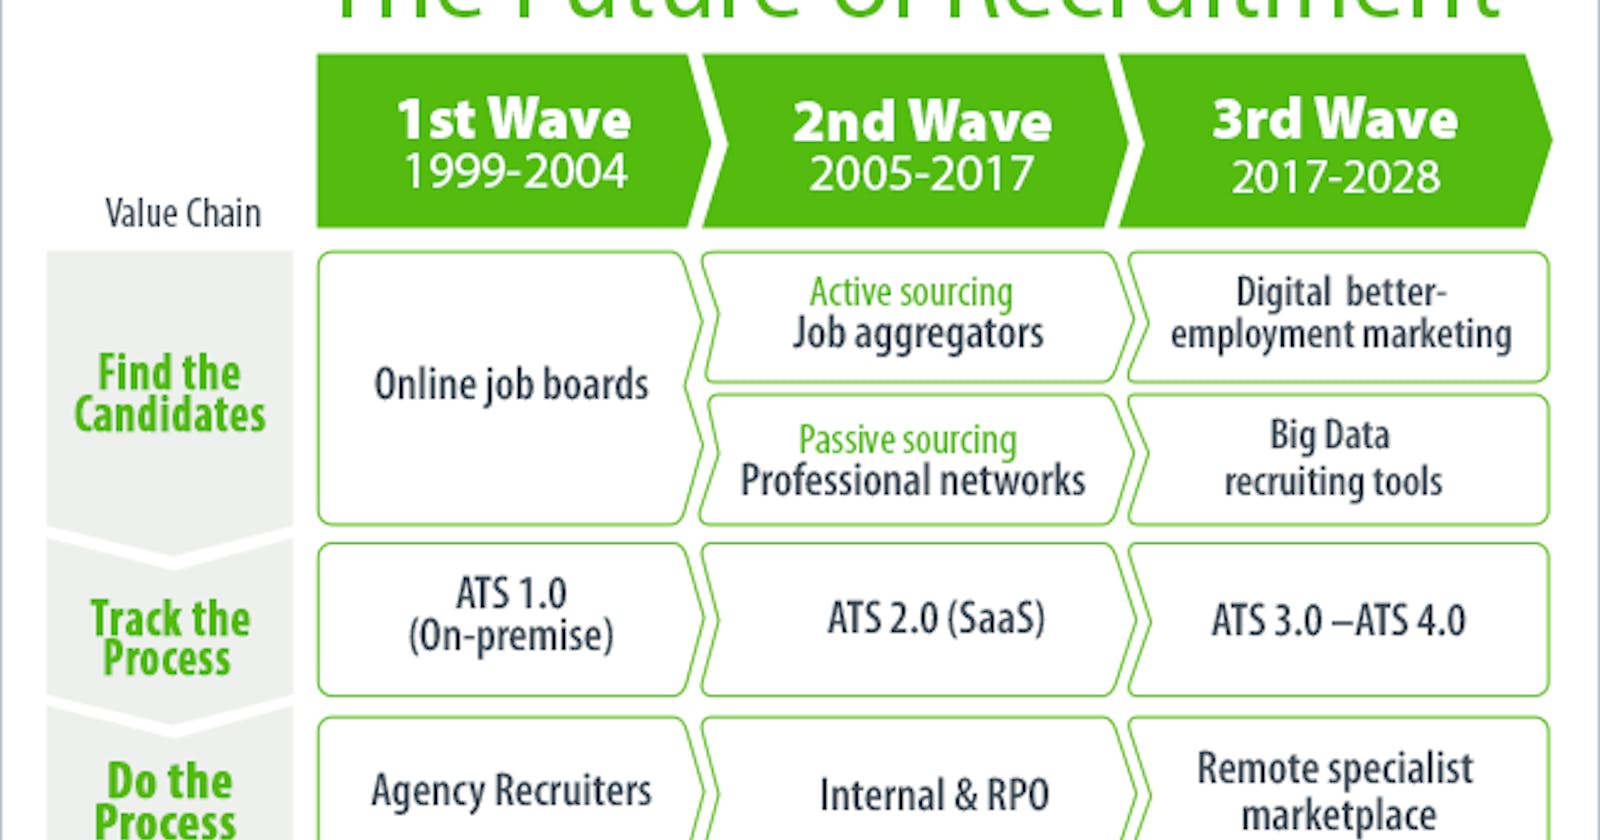 The Future of Recruitment. Trends, Channels and Tools